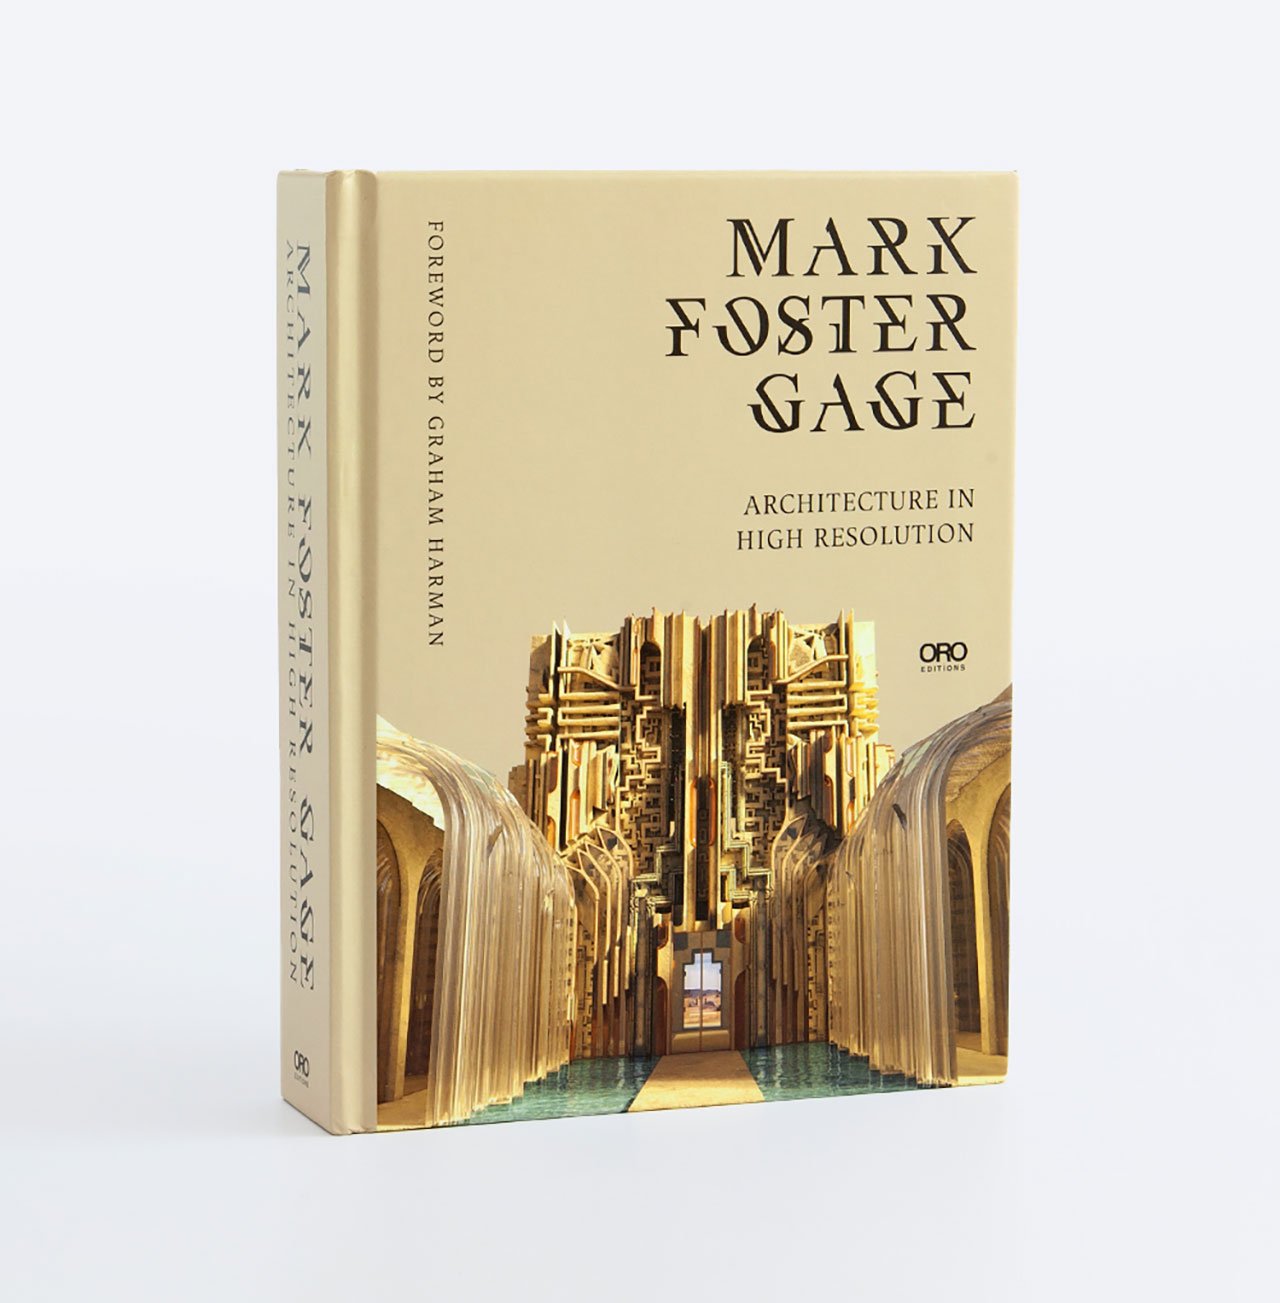 Mark Foster Gage: Architecture in High Resolution. Photography by Brooke Biro © ORO Editions